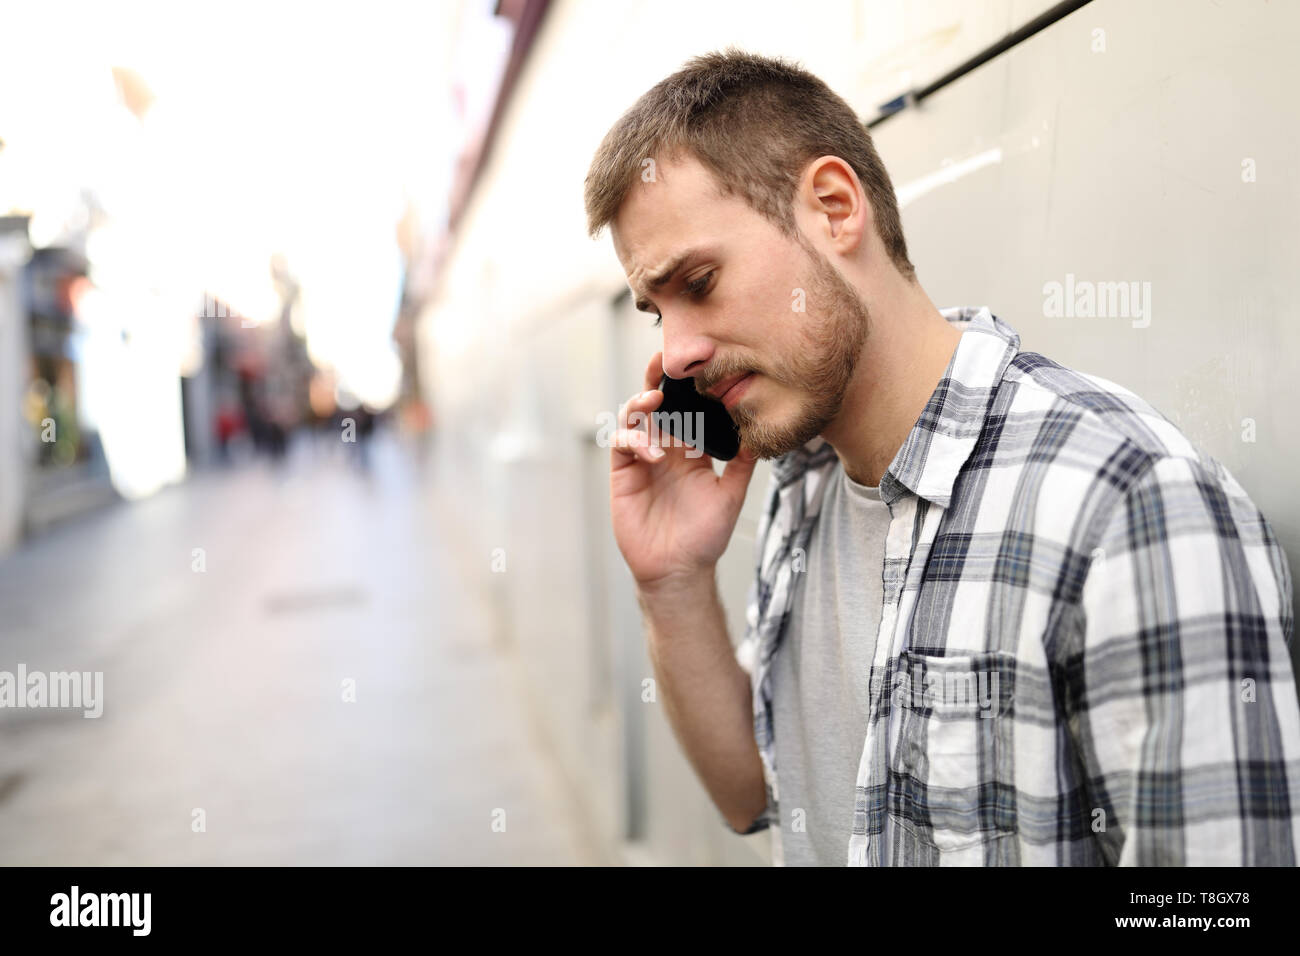 Side view portrait of a sad man talking on phone alone in a solitary street Stock Photo